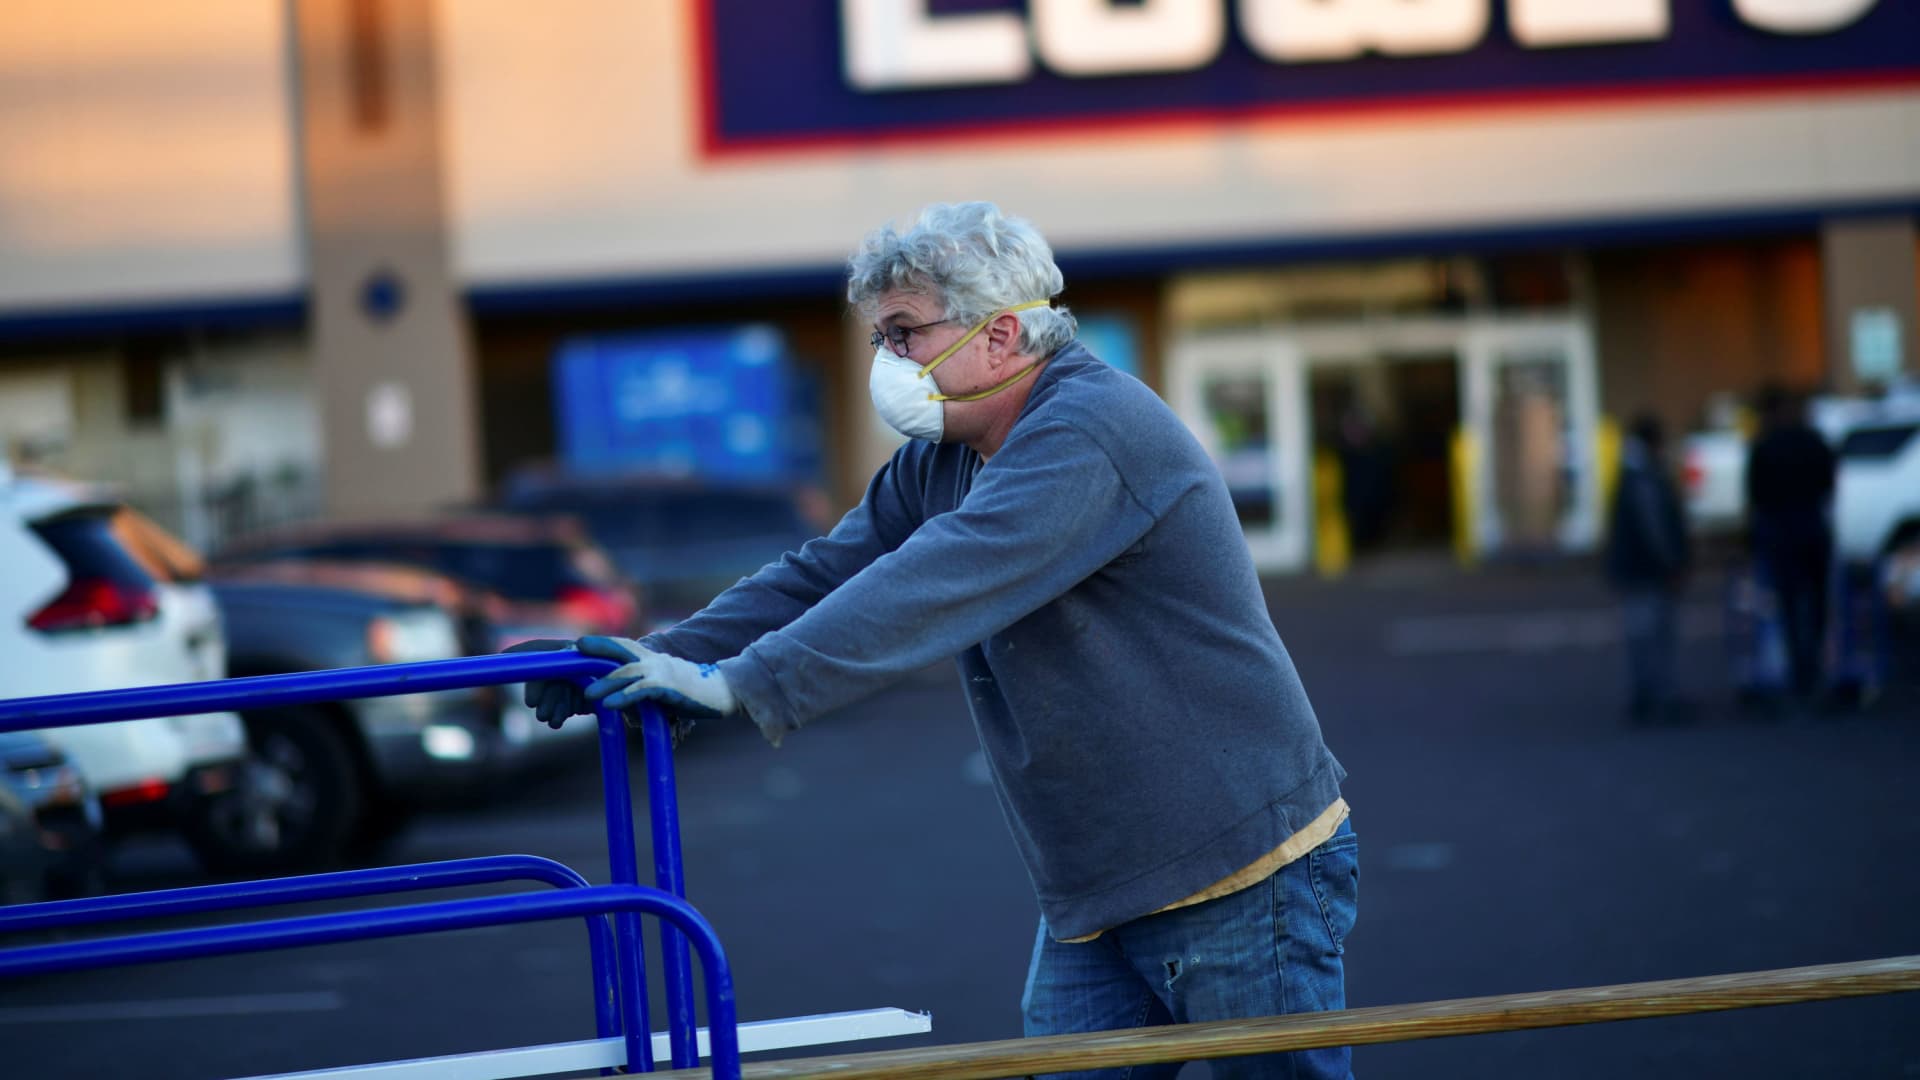 A shopper departs after visiting a Lowe's hardware store in Philadelphia, Pennsylvania, November 4, 2020.